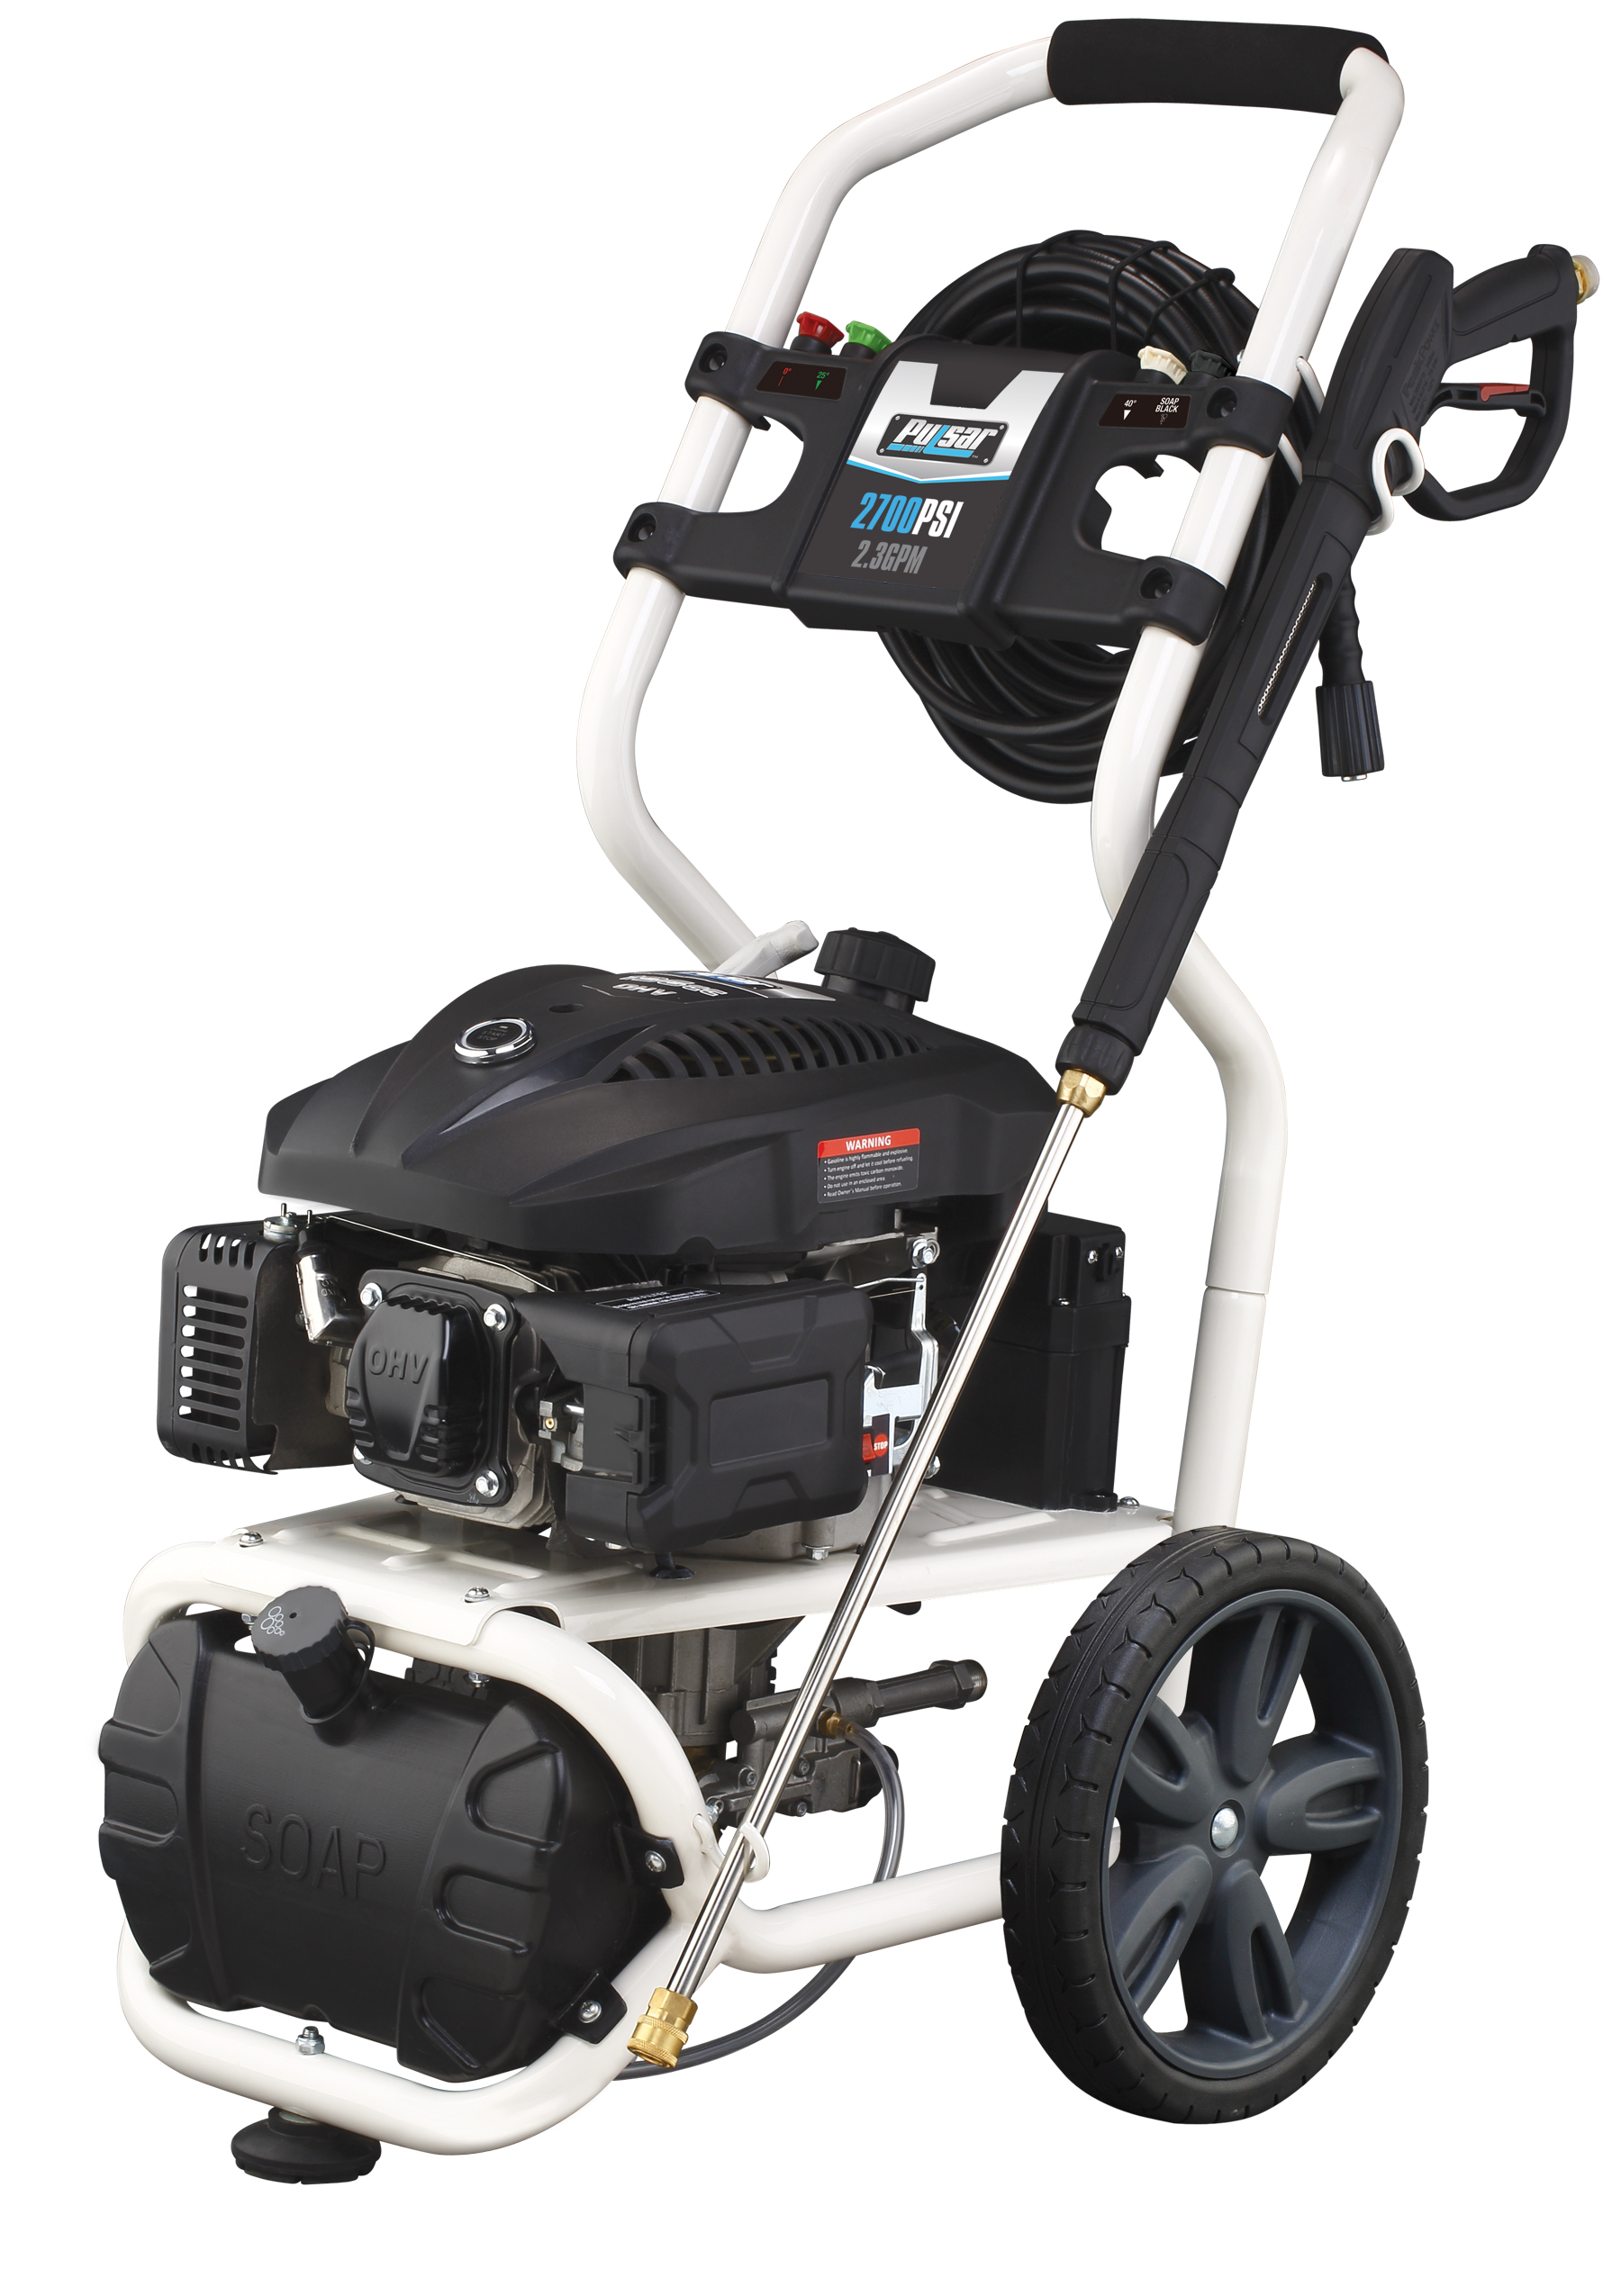 [DISCONTINUED] Pulsar PWG2700VE Gas Pressure Washer